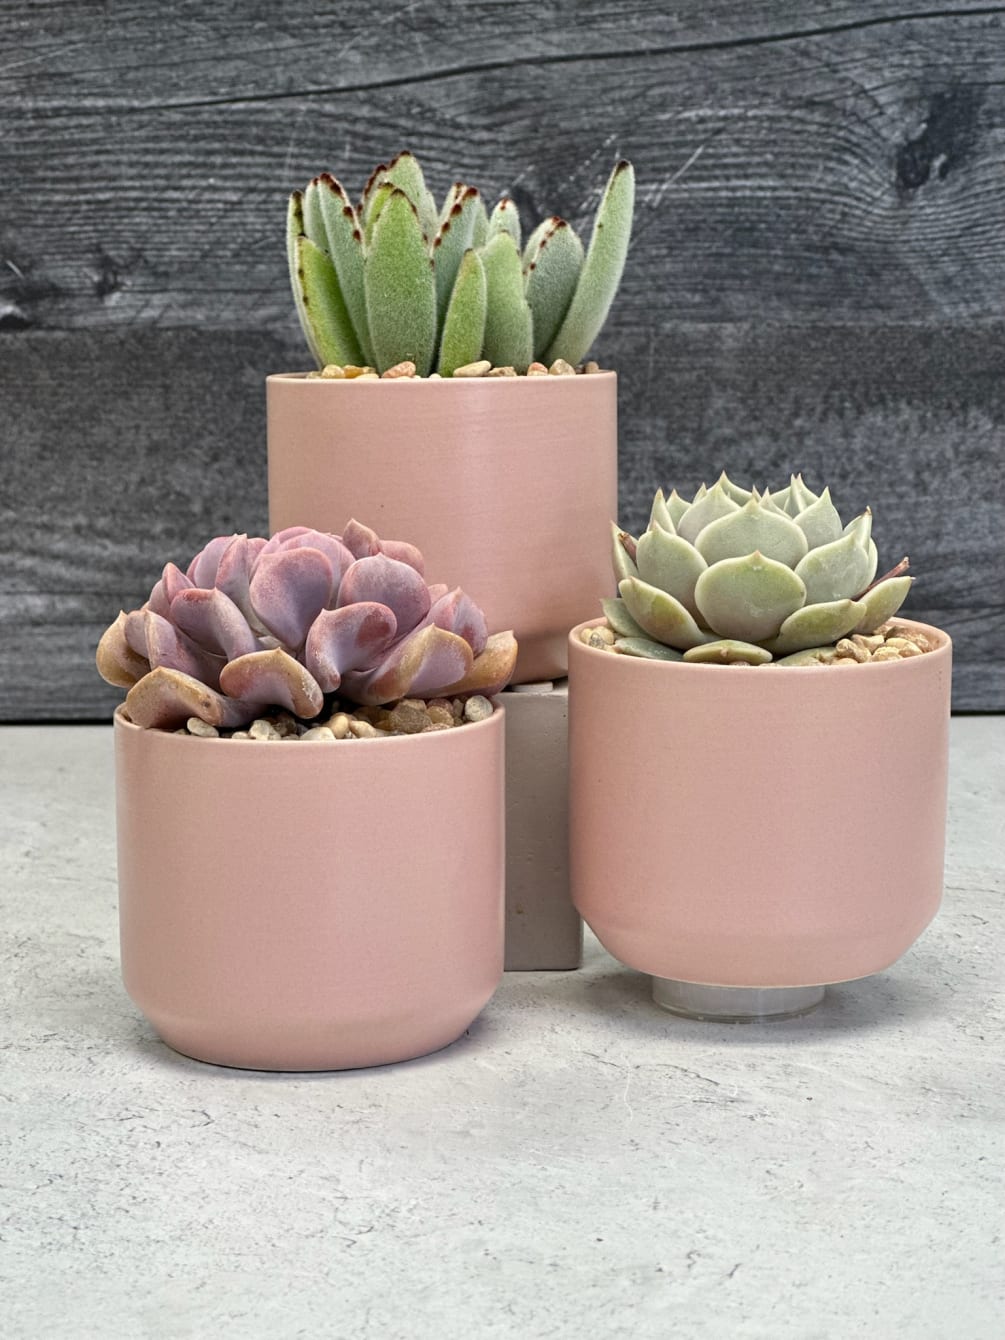 Succulent trio in ceramic pink cylinder pot (4&rdquo;x4&rdquo; no drainage hole)
Succulents may